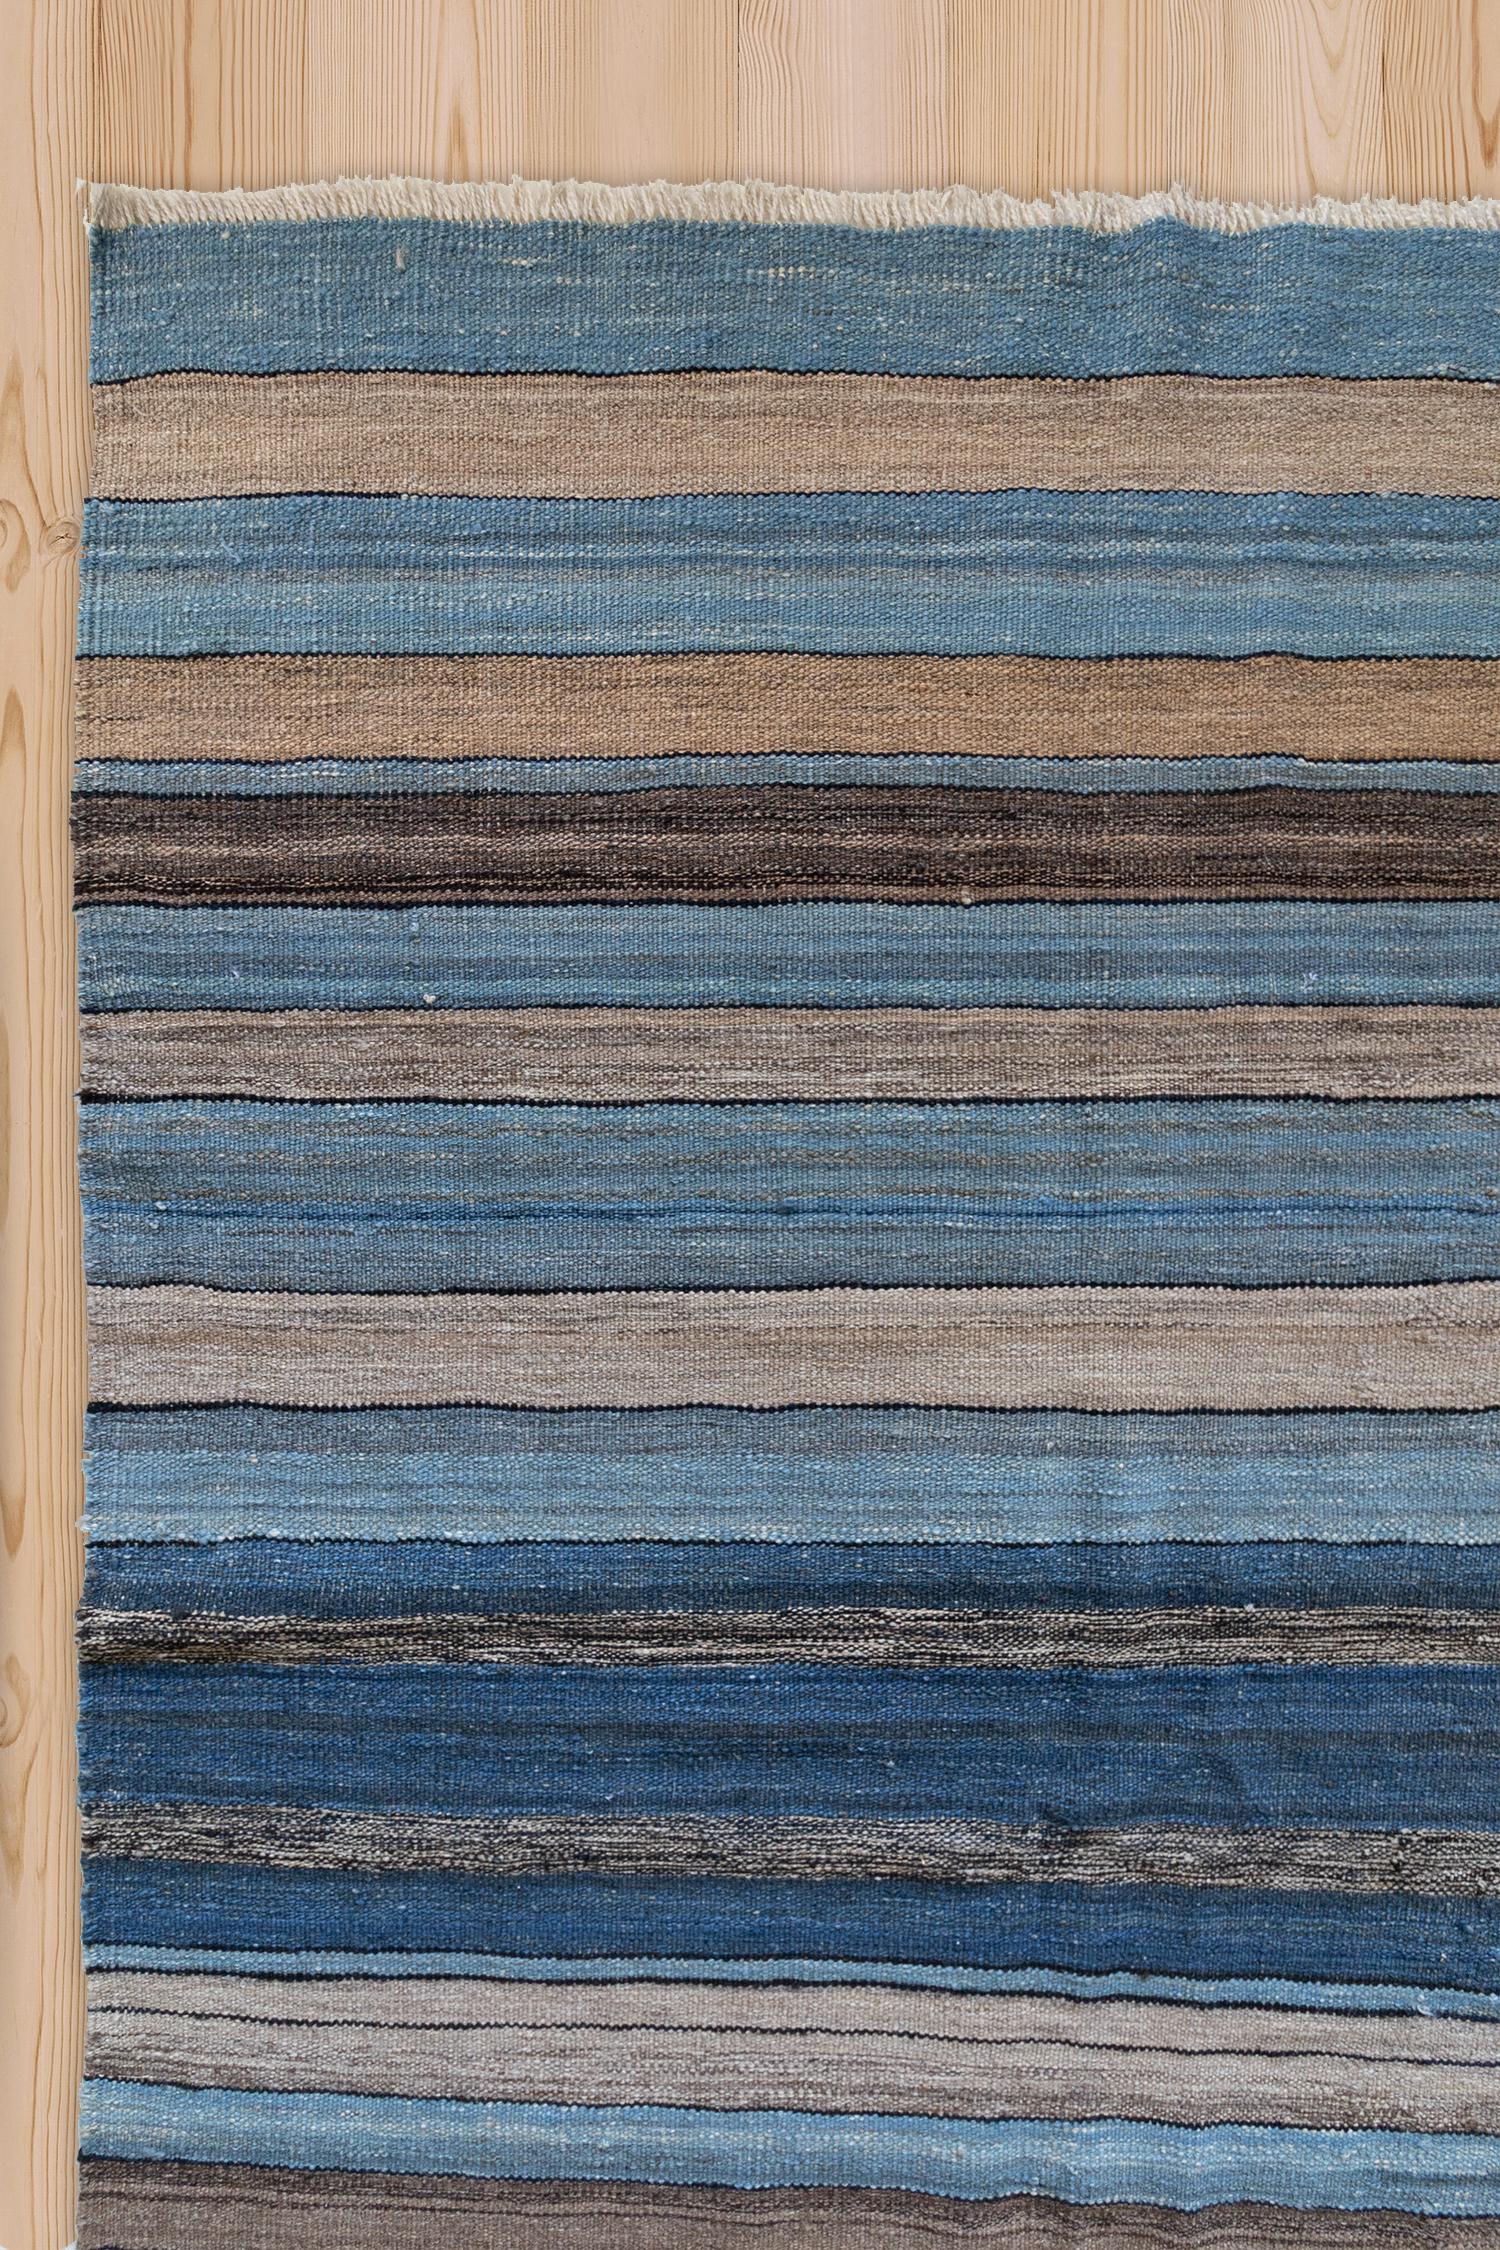 Age: Circa 1940

Colors: Blue, brown.

Pile: flatweave.

Material: hemp, wool.

Wear Notes: 1

Gorgeous flatweave rug in vibrant indigo, brown, caramel, and charcoal tones. 

Wear Guide:
Vintage and antique rugs are by nature, pre-loved